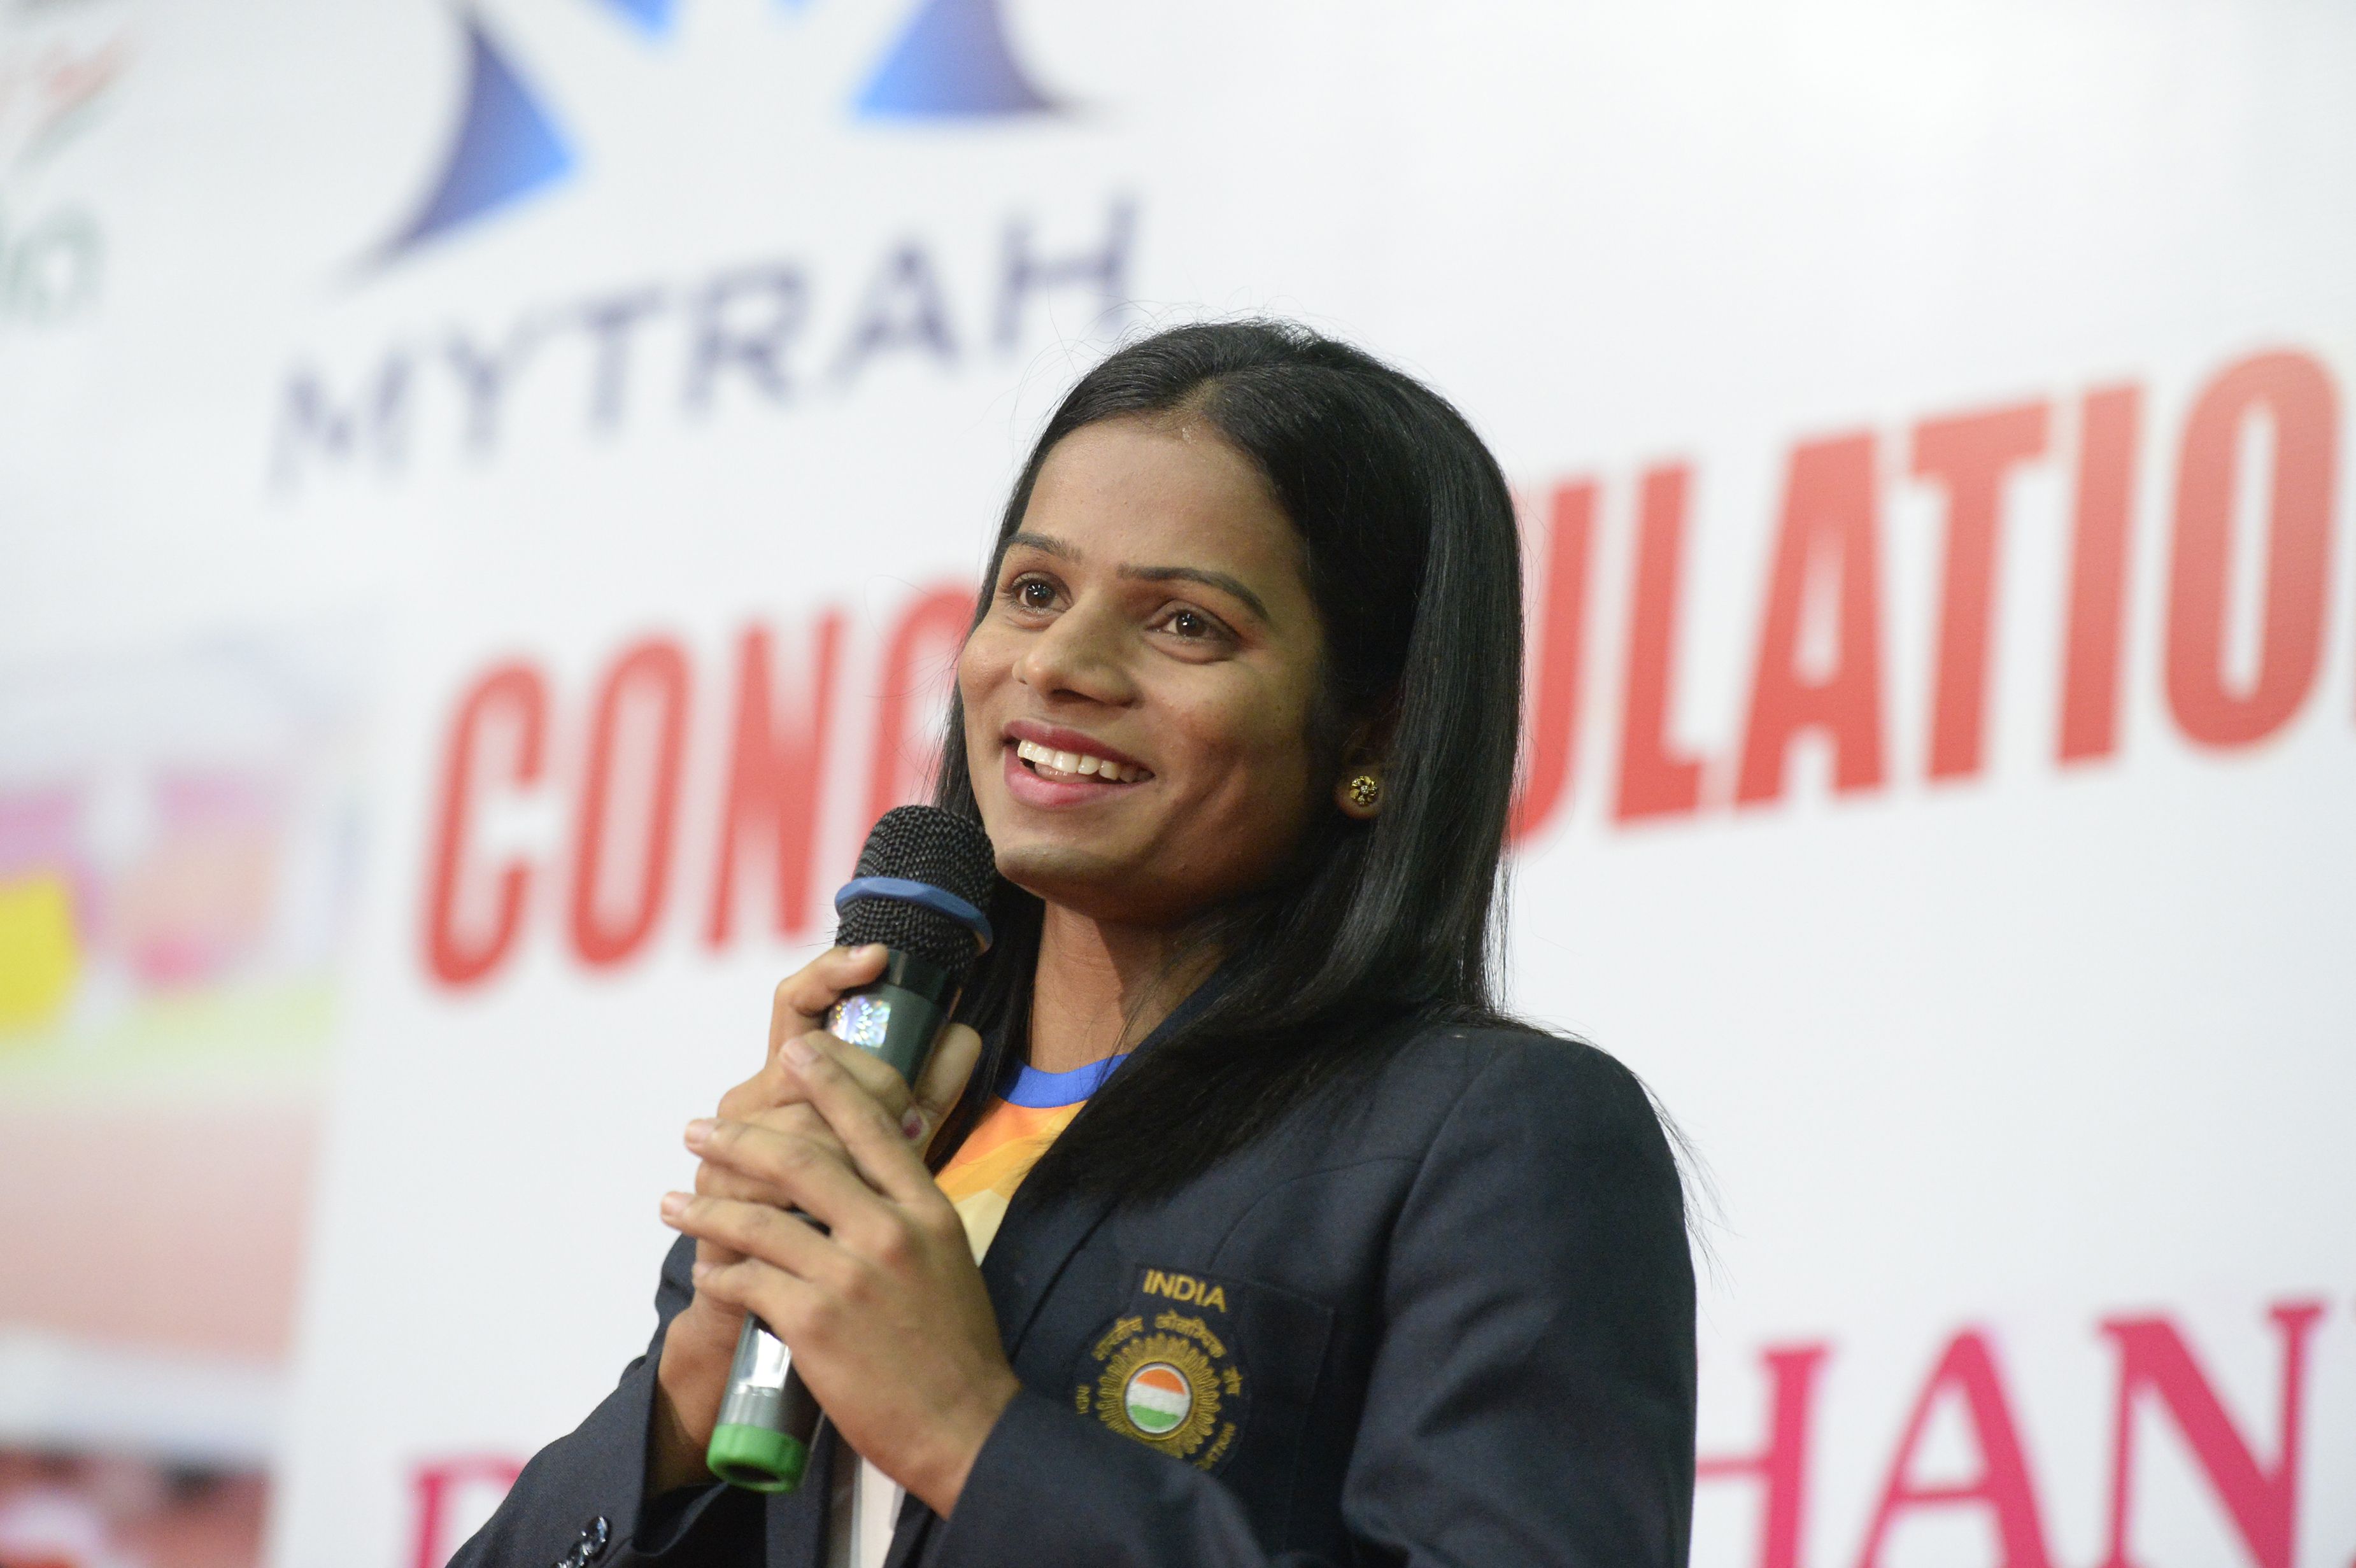 International Women's Day Dutee Chand speaks during a press conference in Hyderabad on September 1, 2018.. (NOAH SEELAM/AFP/Getty Images)